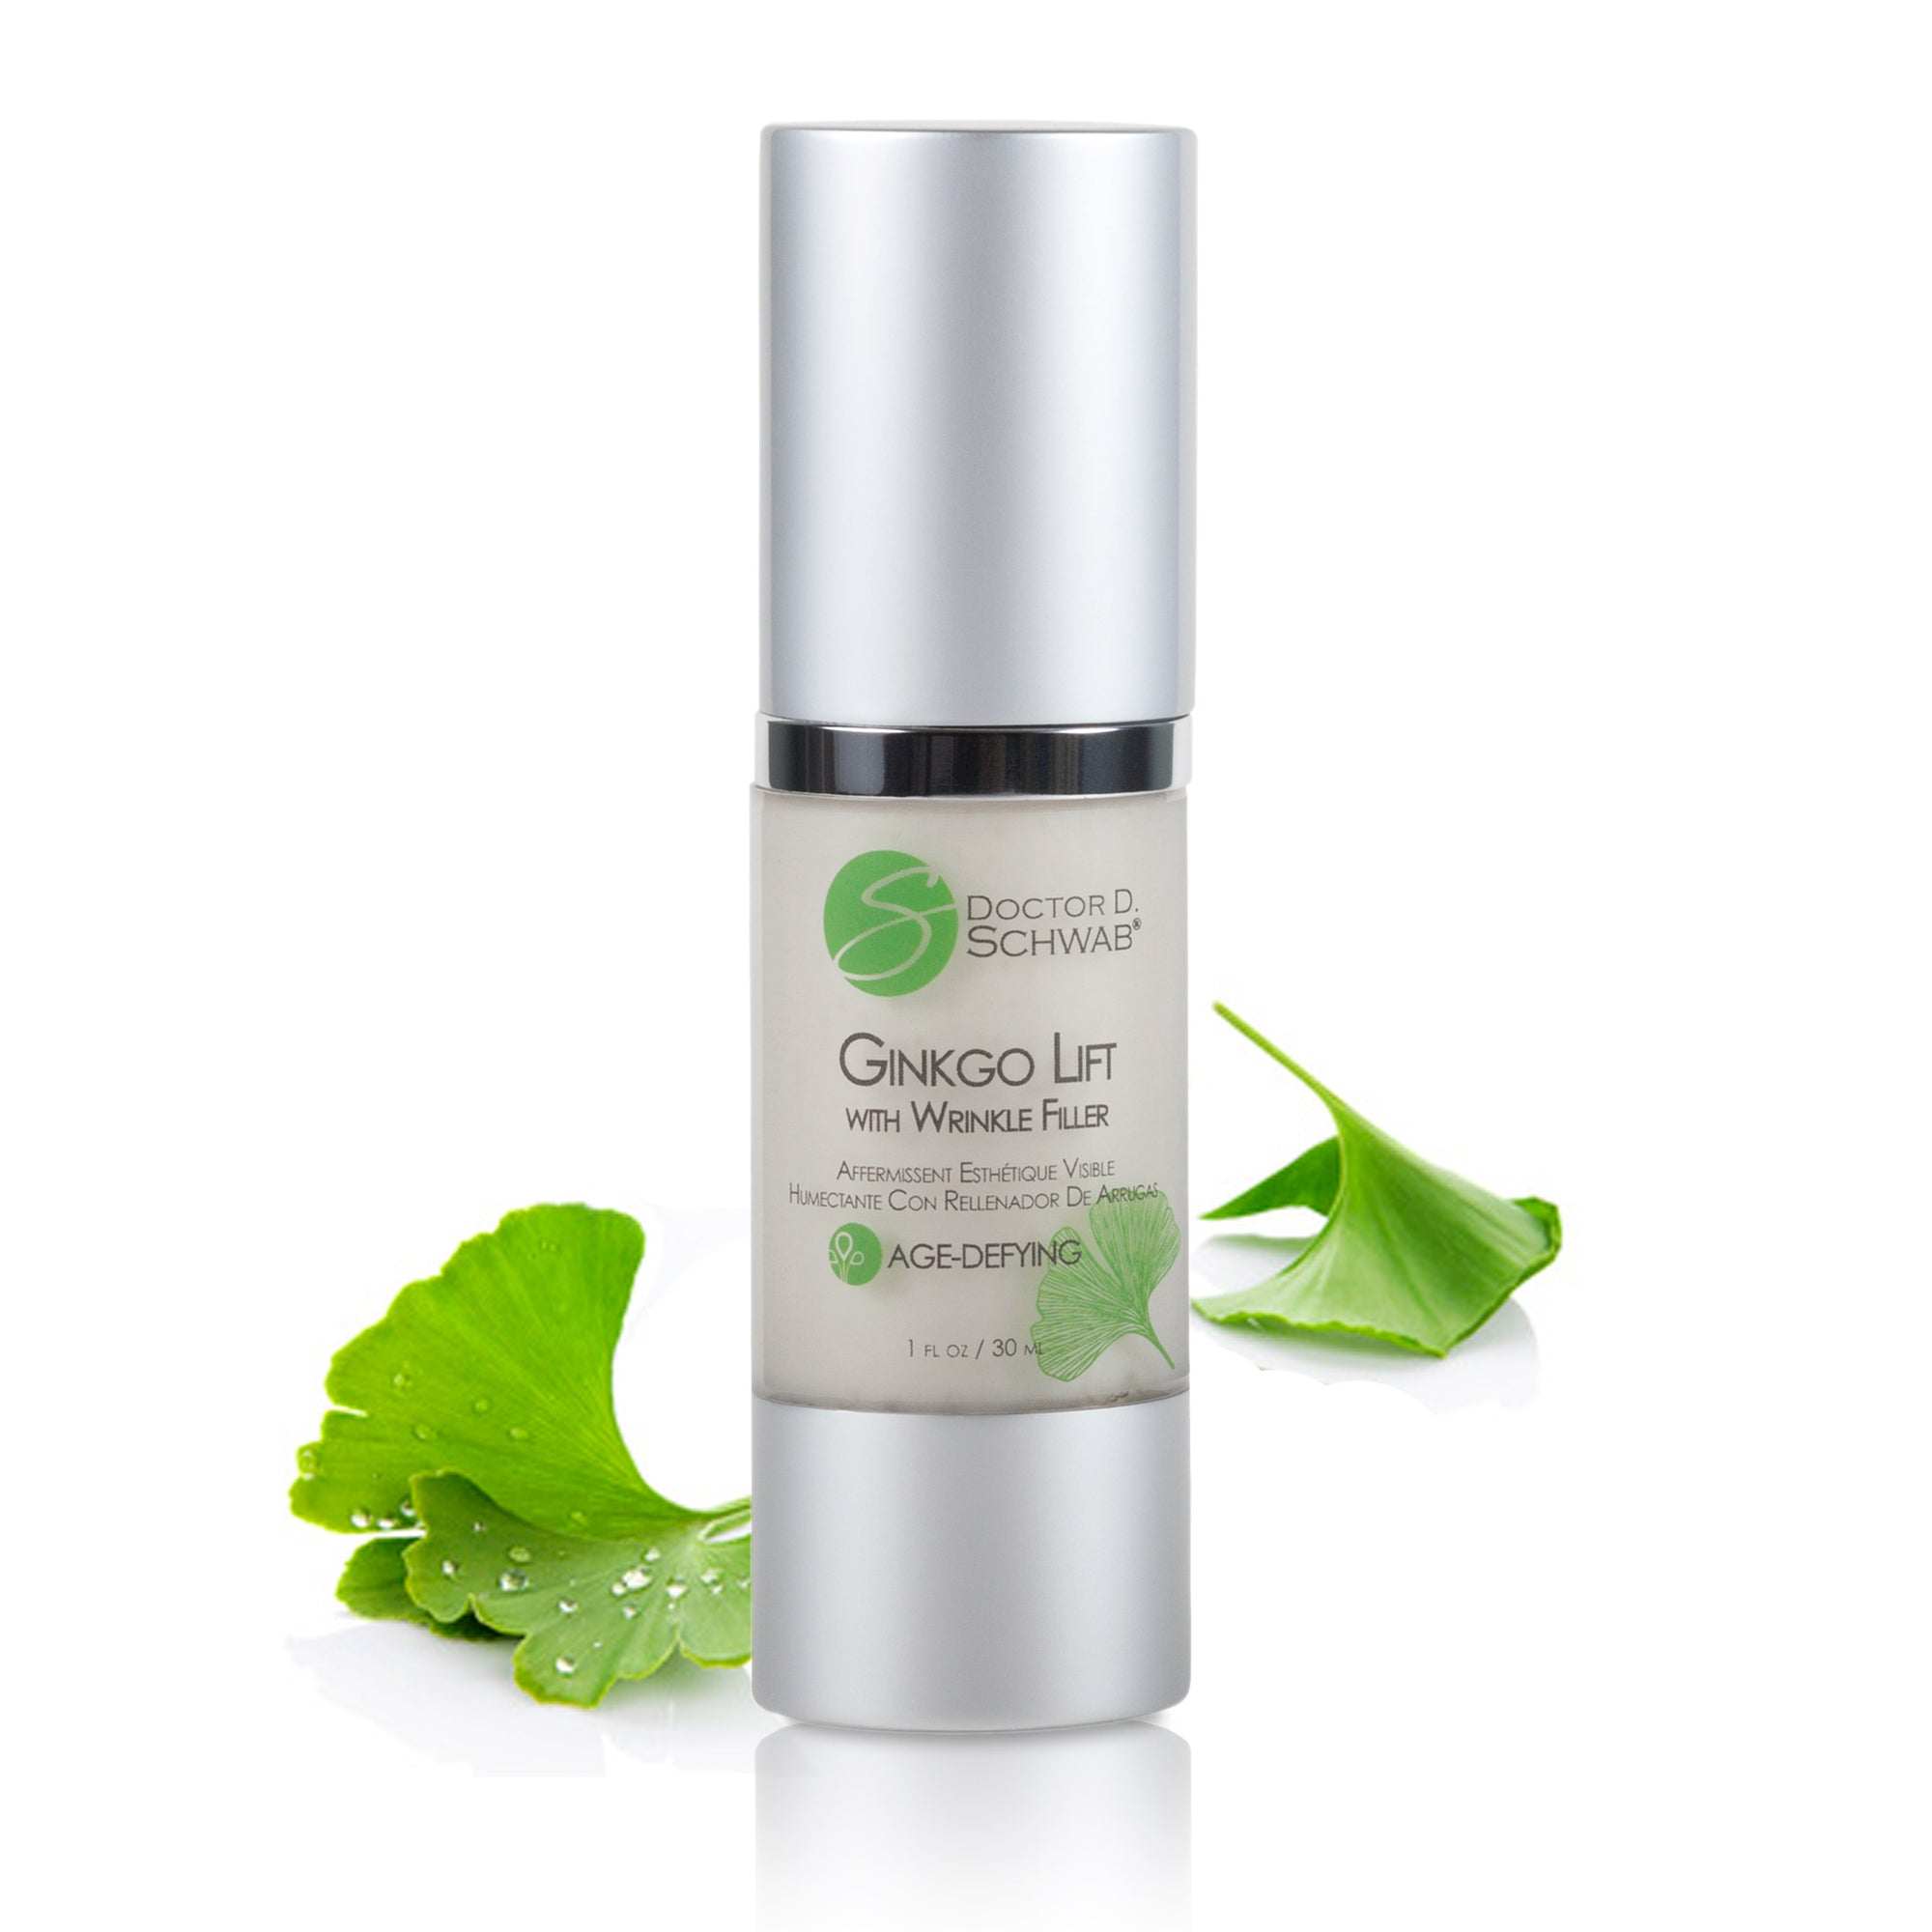 Ginkgo Lift® with Wrinkle Filler - Firming, Lifting, Age-Defying Moisturizer